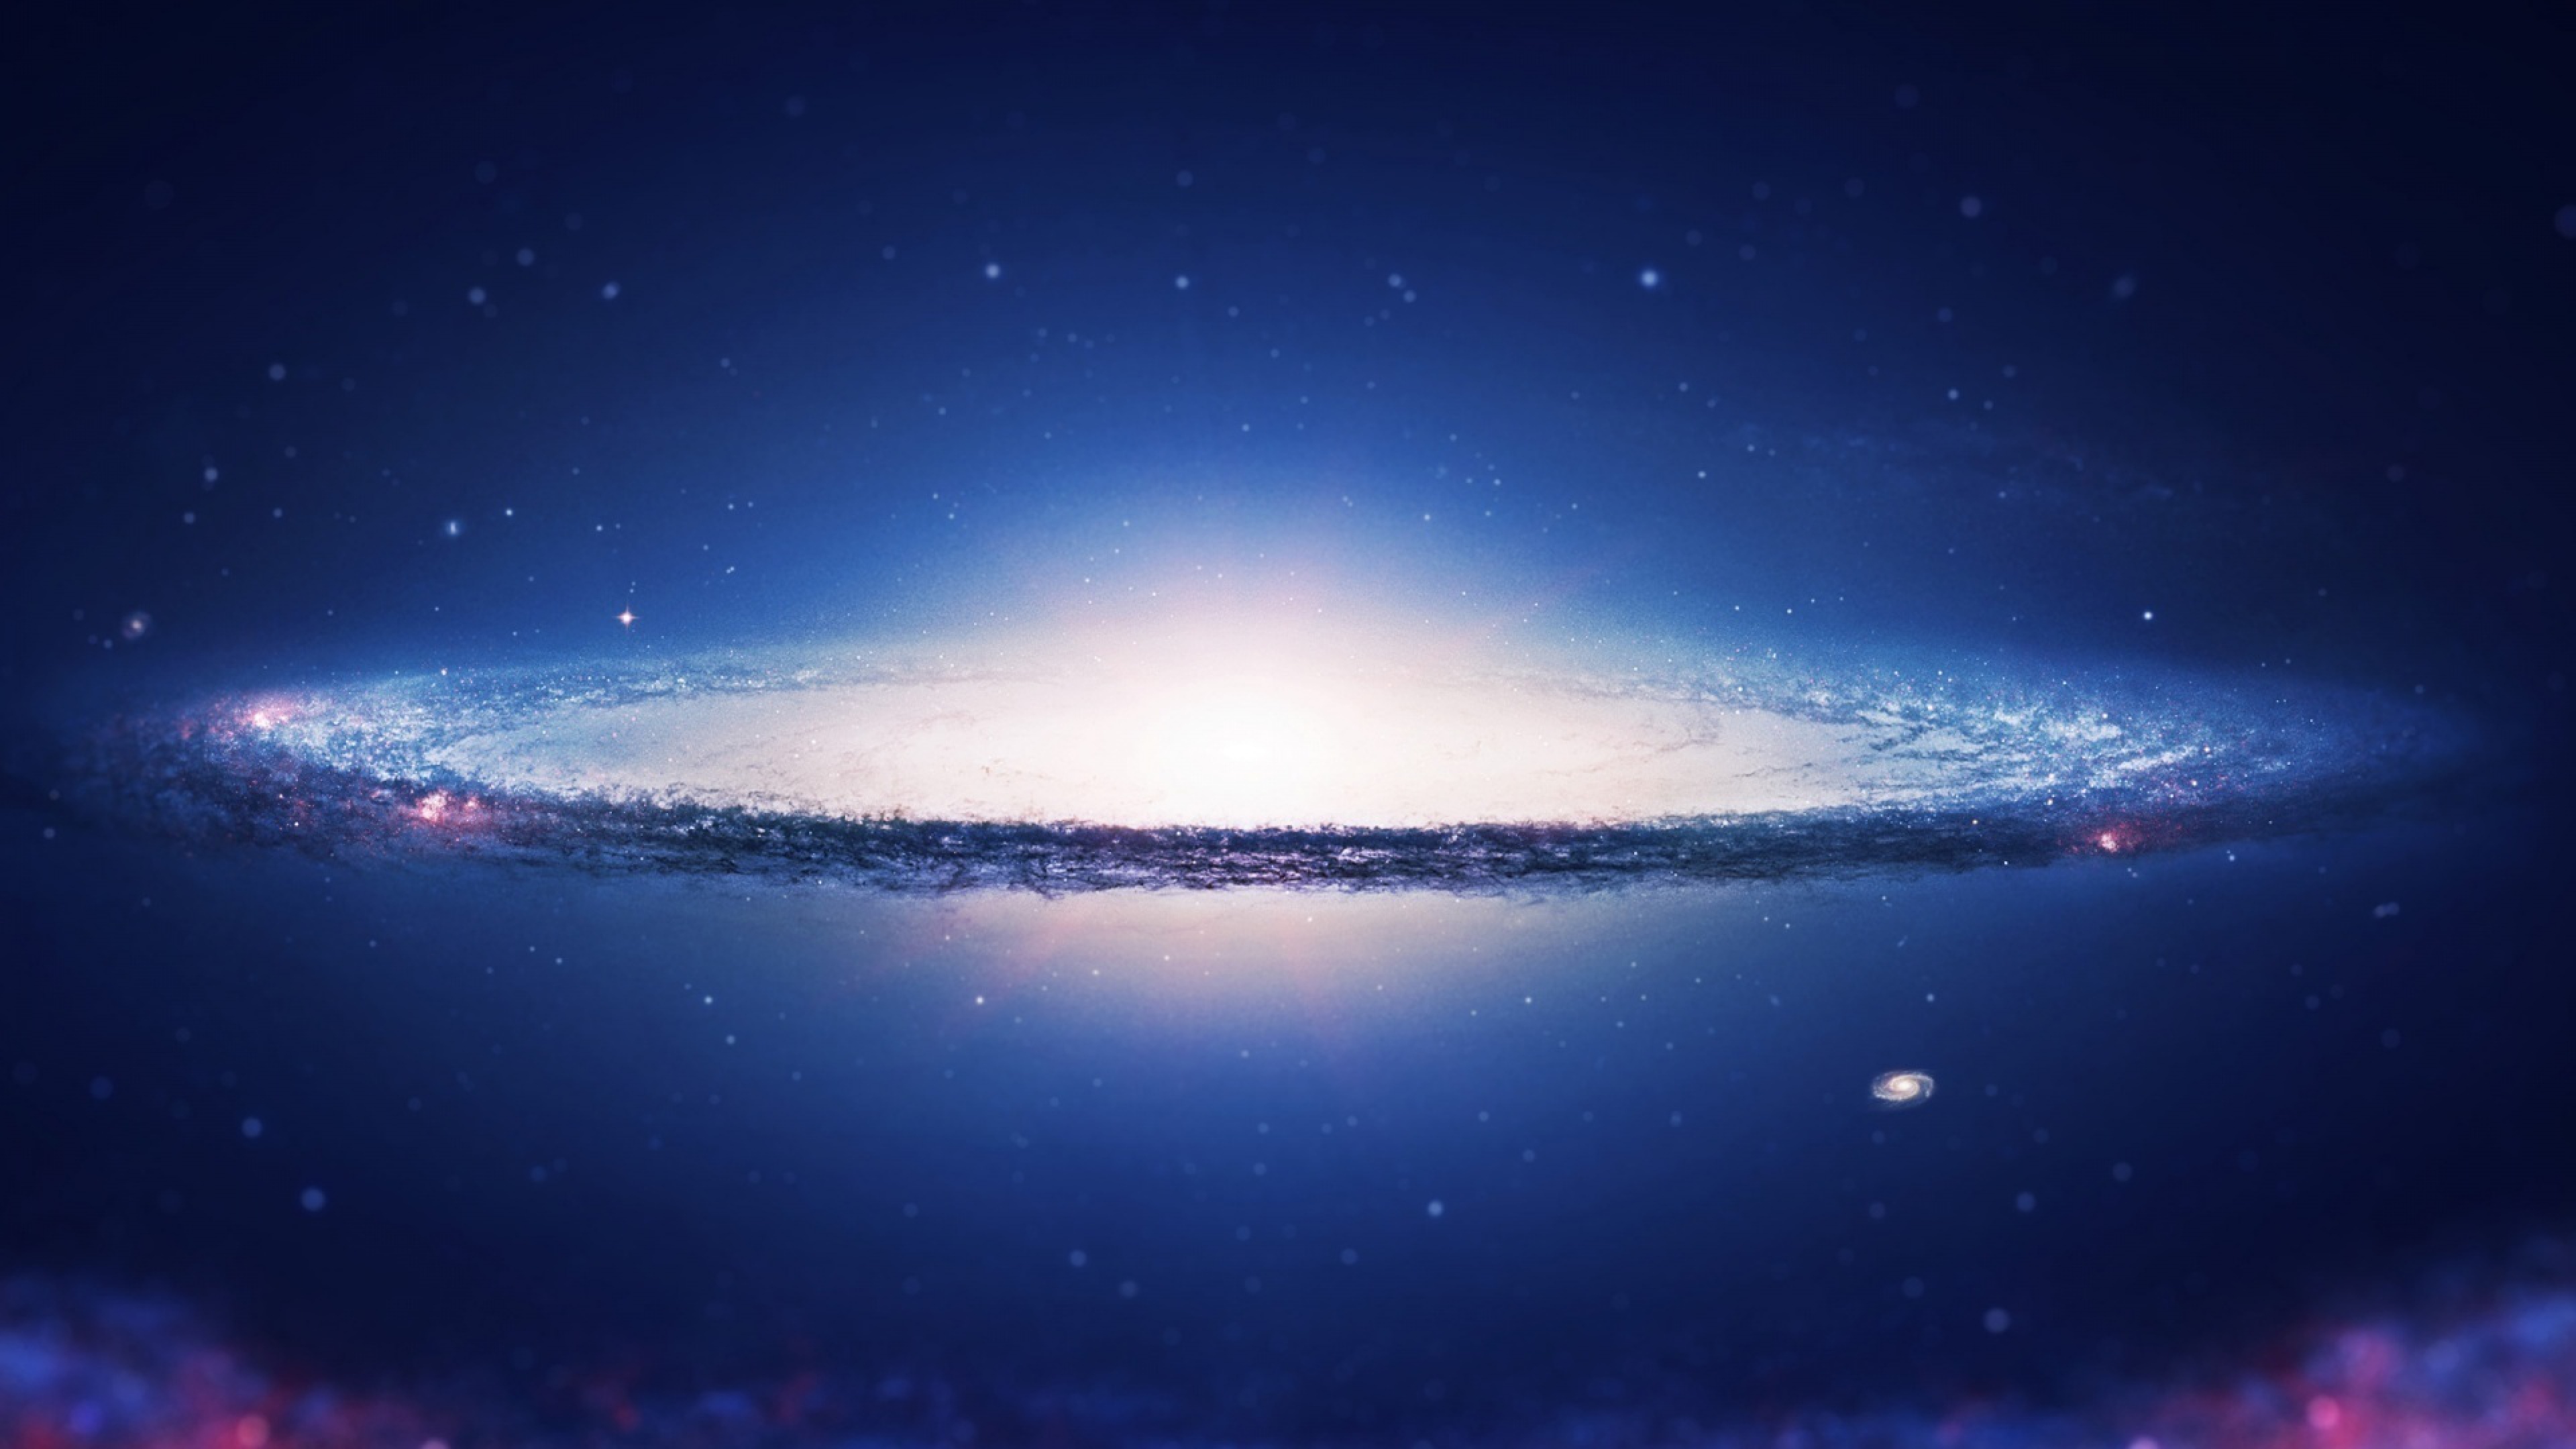 Free download Download Wallpaper 3840x2160 space sky spiral